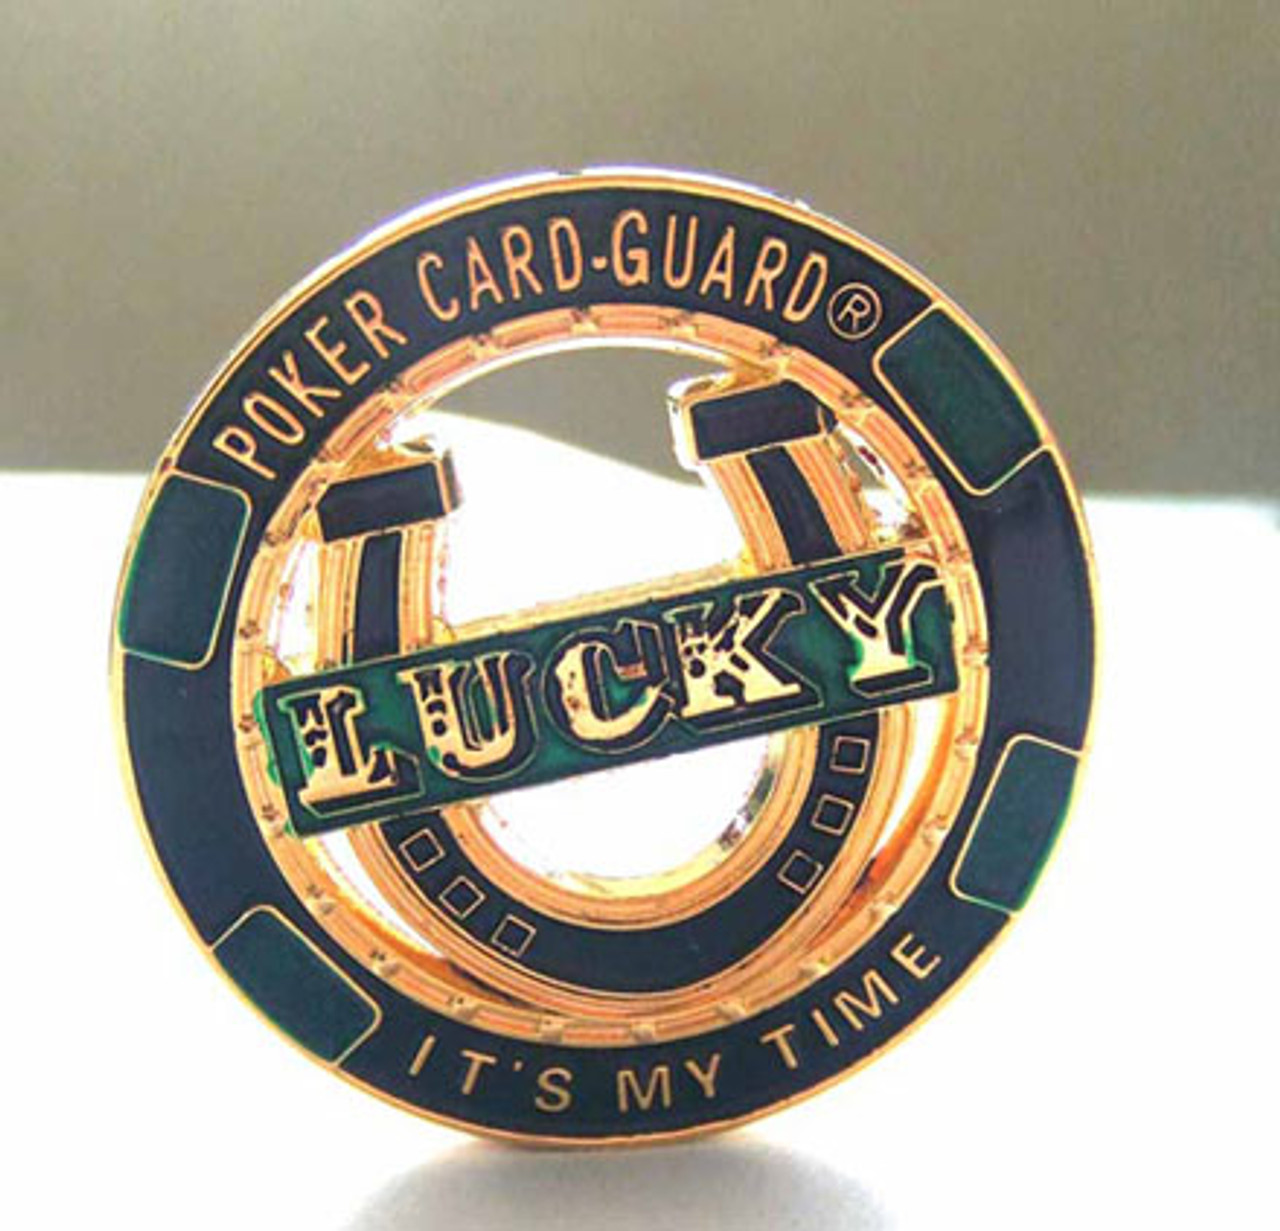 Poker Card Guard - Lucky, It's My Time